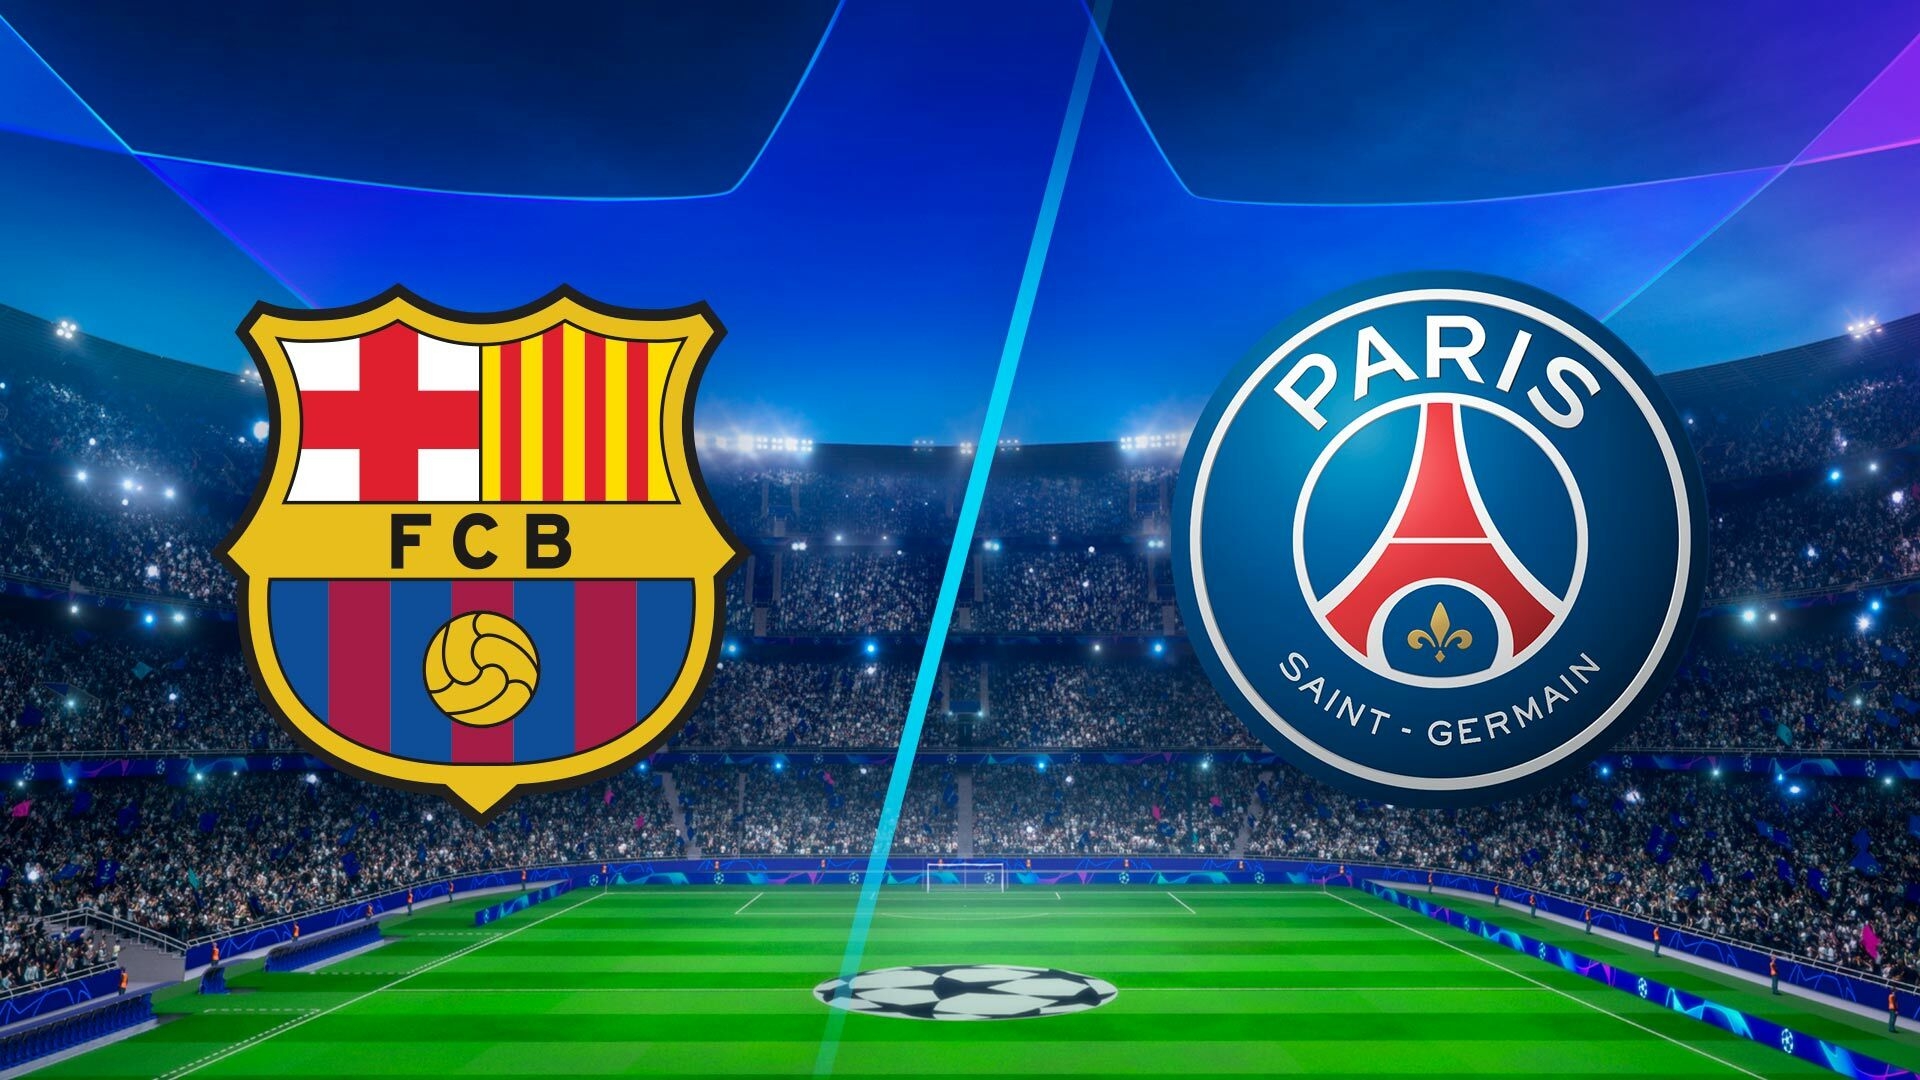 PSG Set To Buy This Barcelona Player For Just €50m